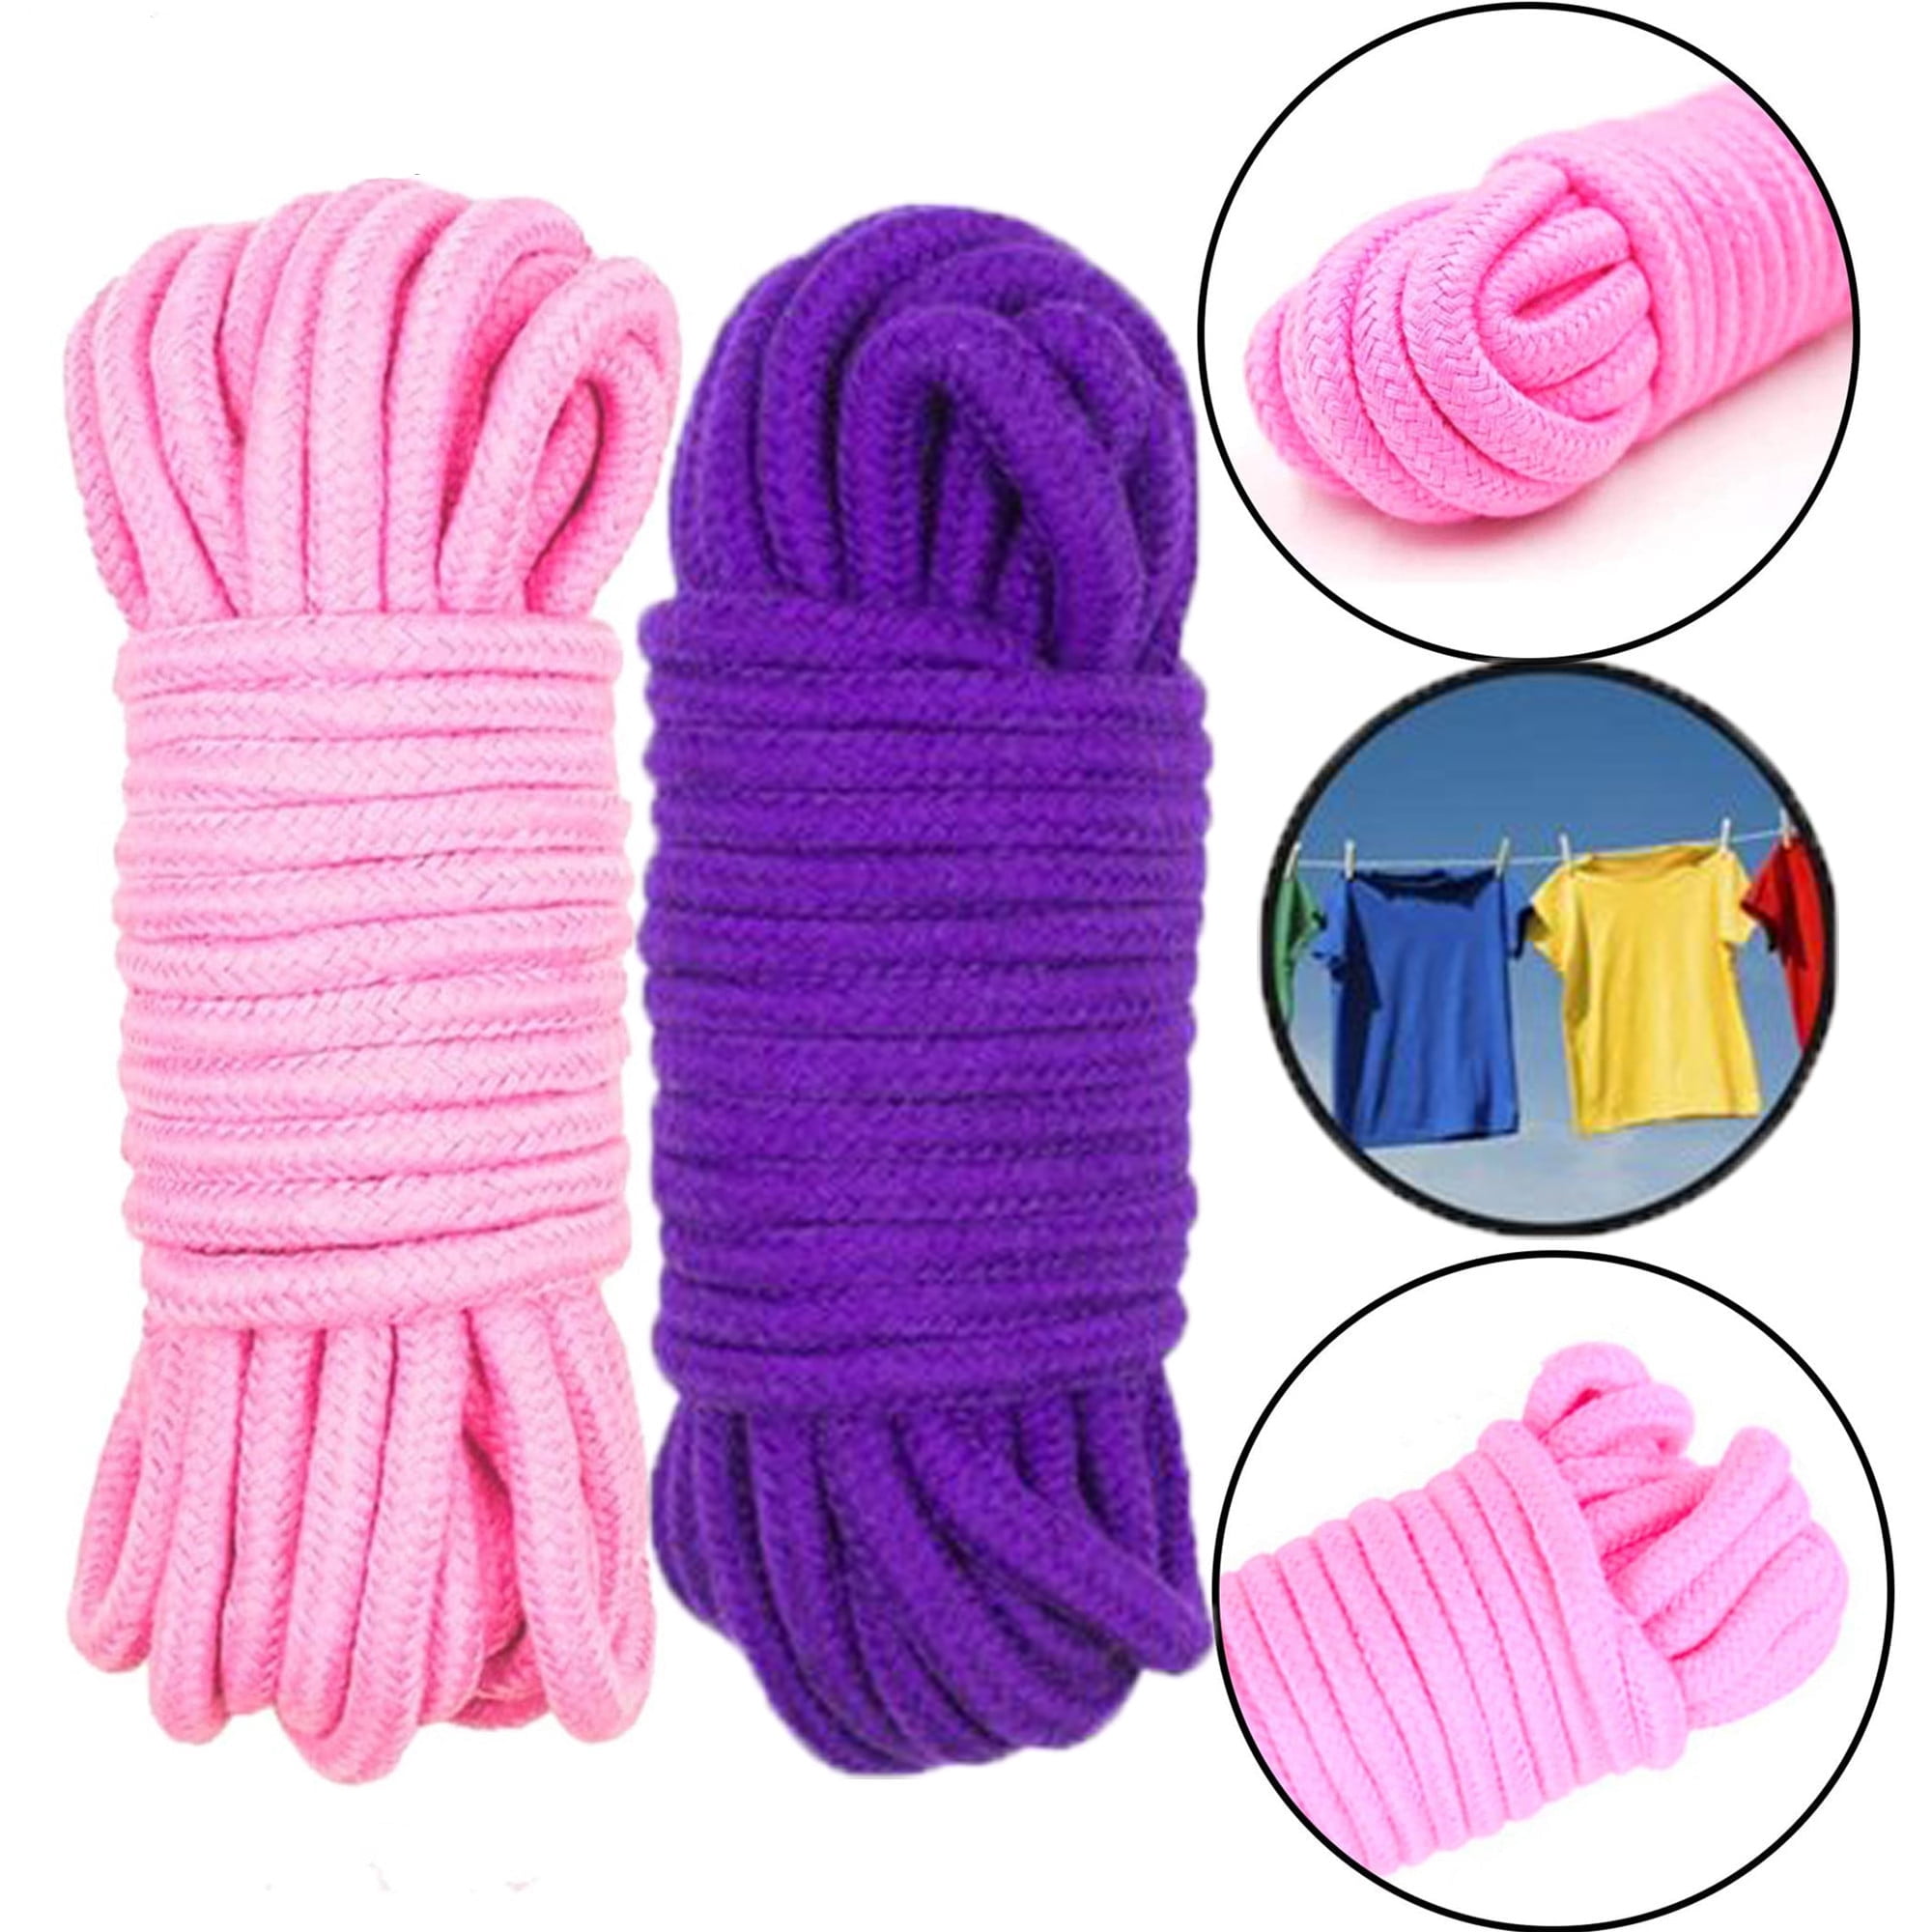 Cotton Party Accessory, Roll Rope 1mm Cotton